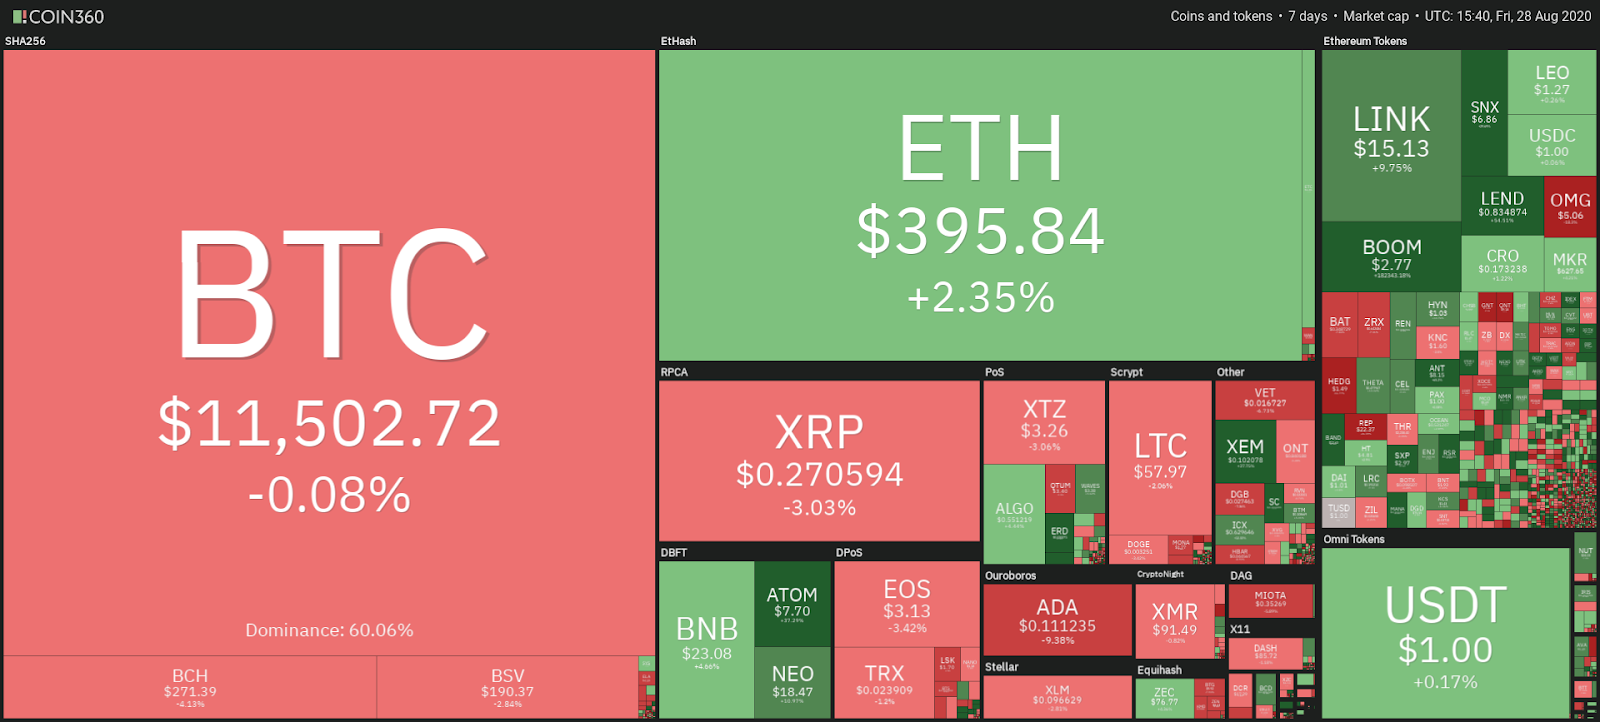 Cryptocurrency market weekly performance snapshot